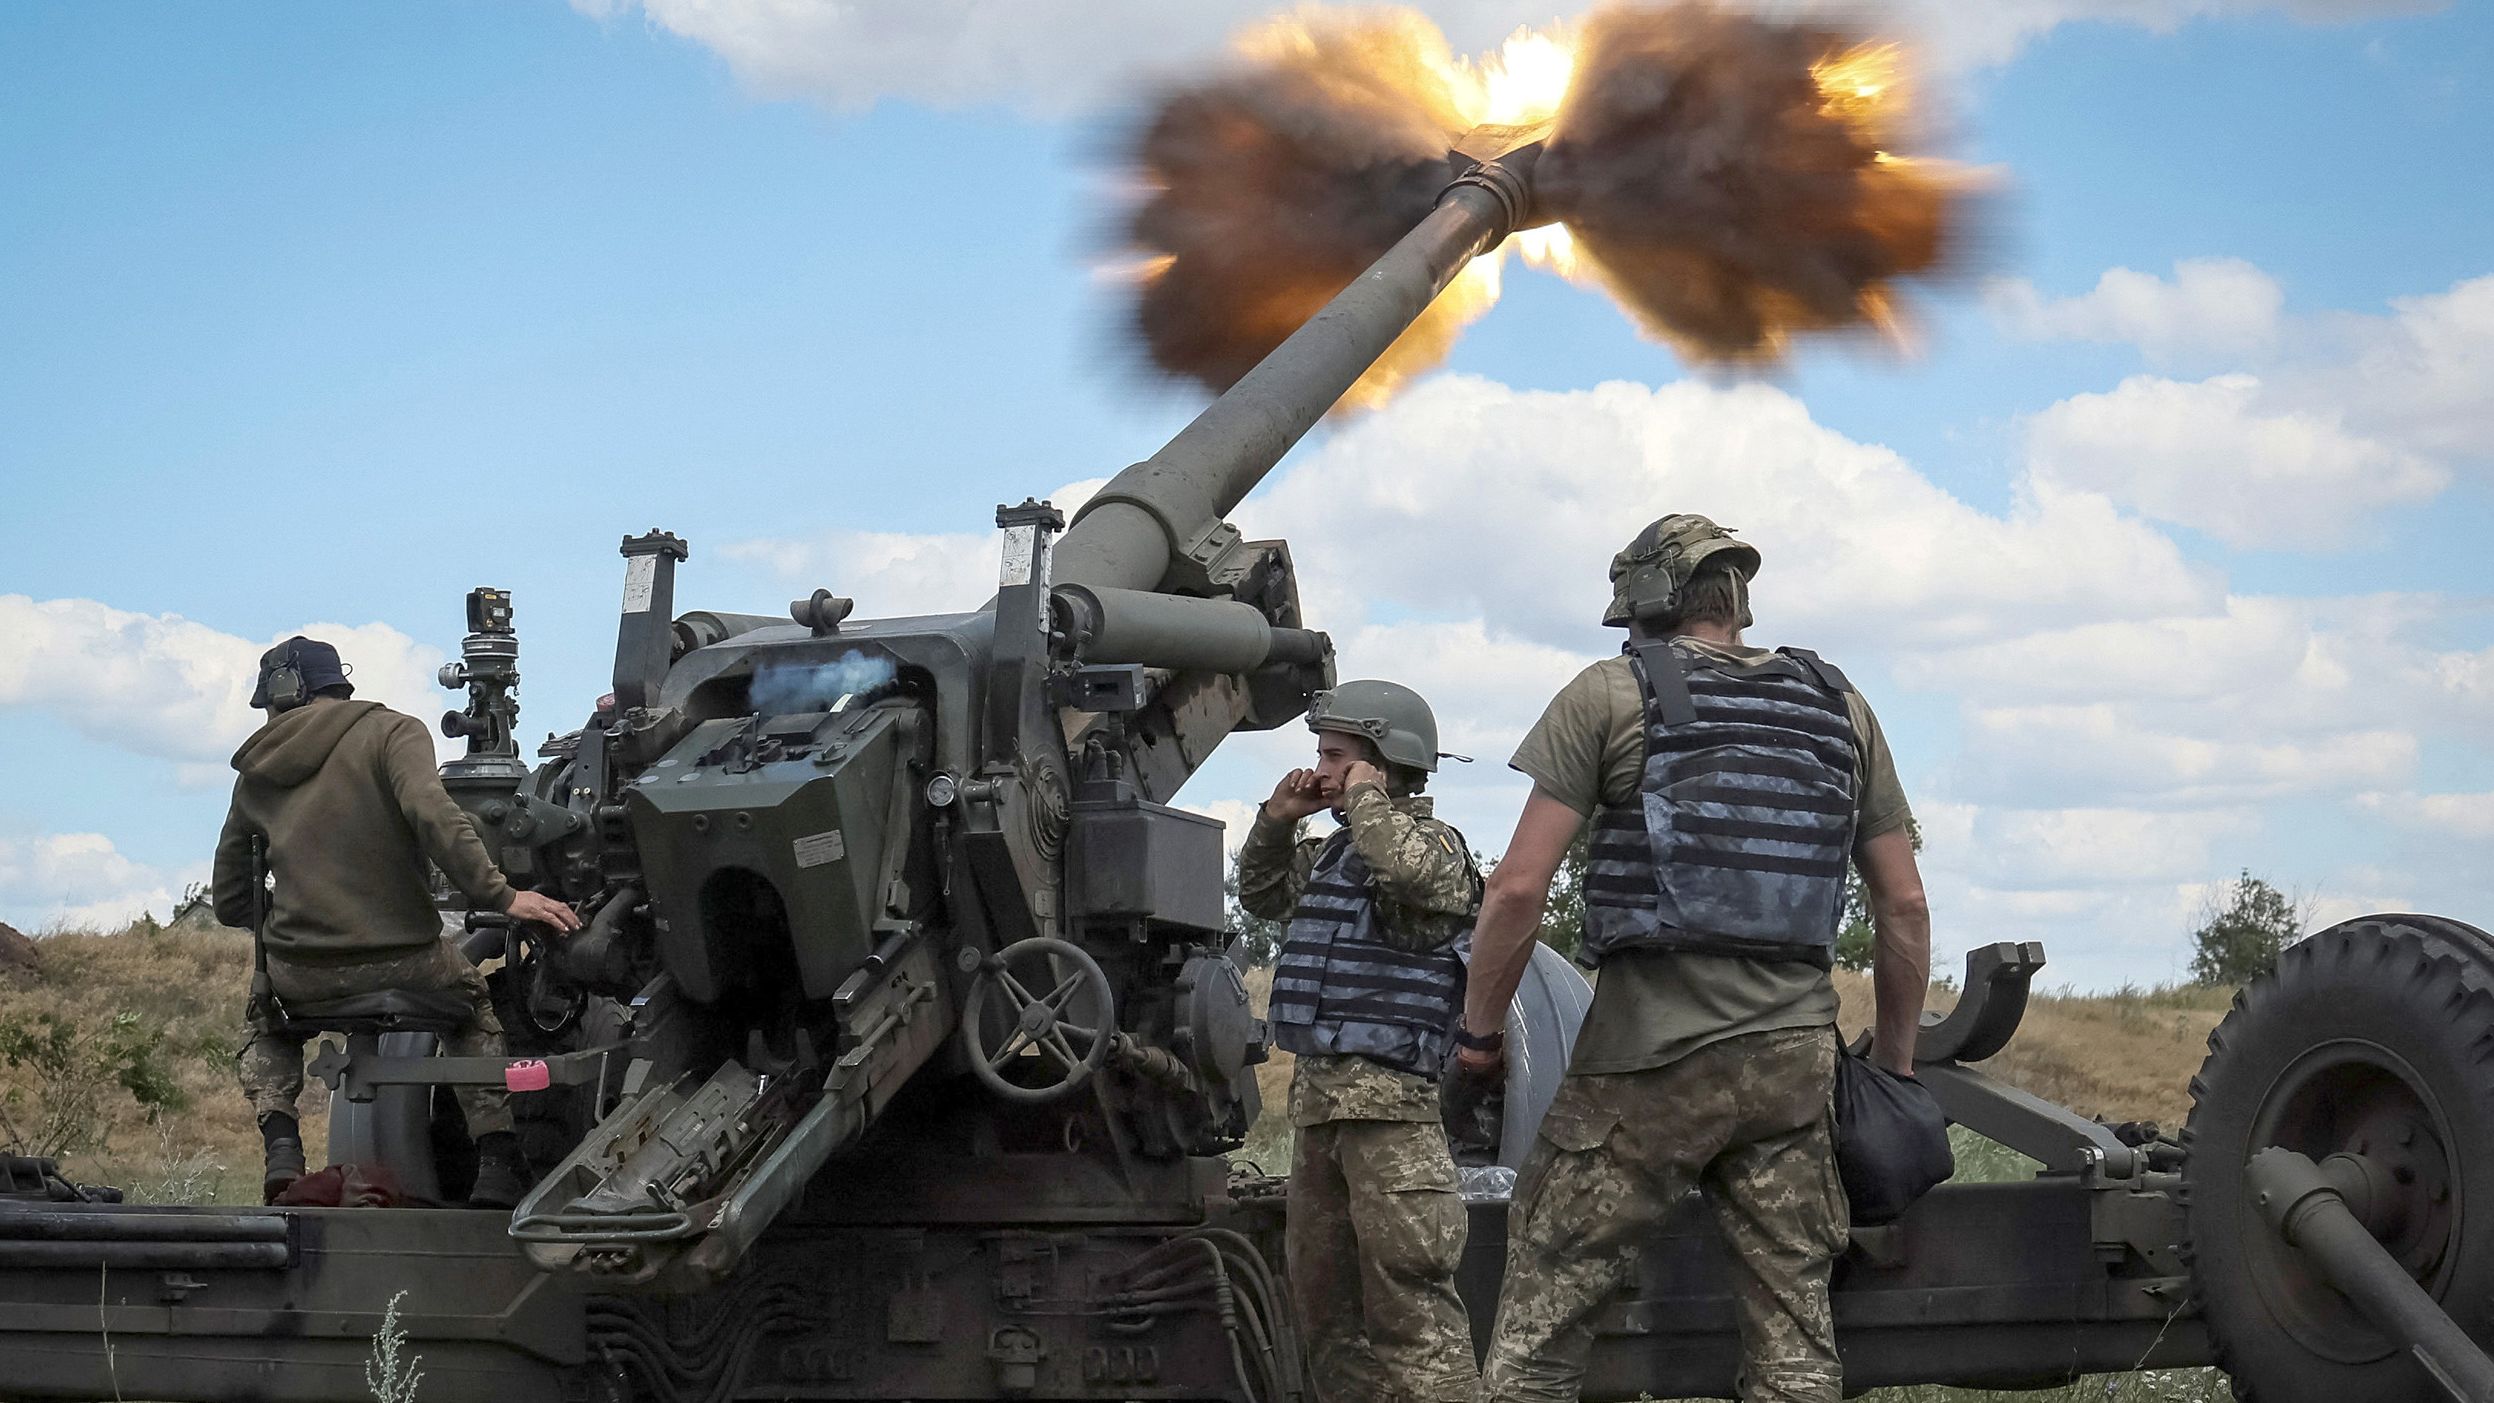 Ukrainian service members fire a shell from a towed howitzer FH-70 at the front line in the Donbas region, Ukraine, on July 18.